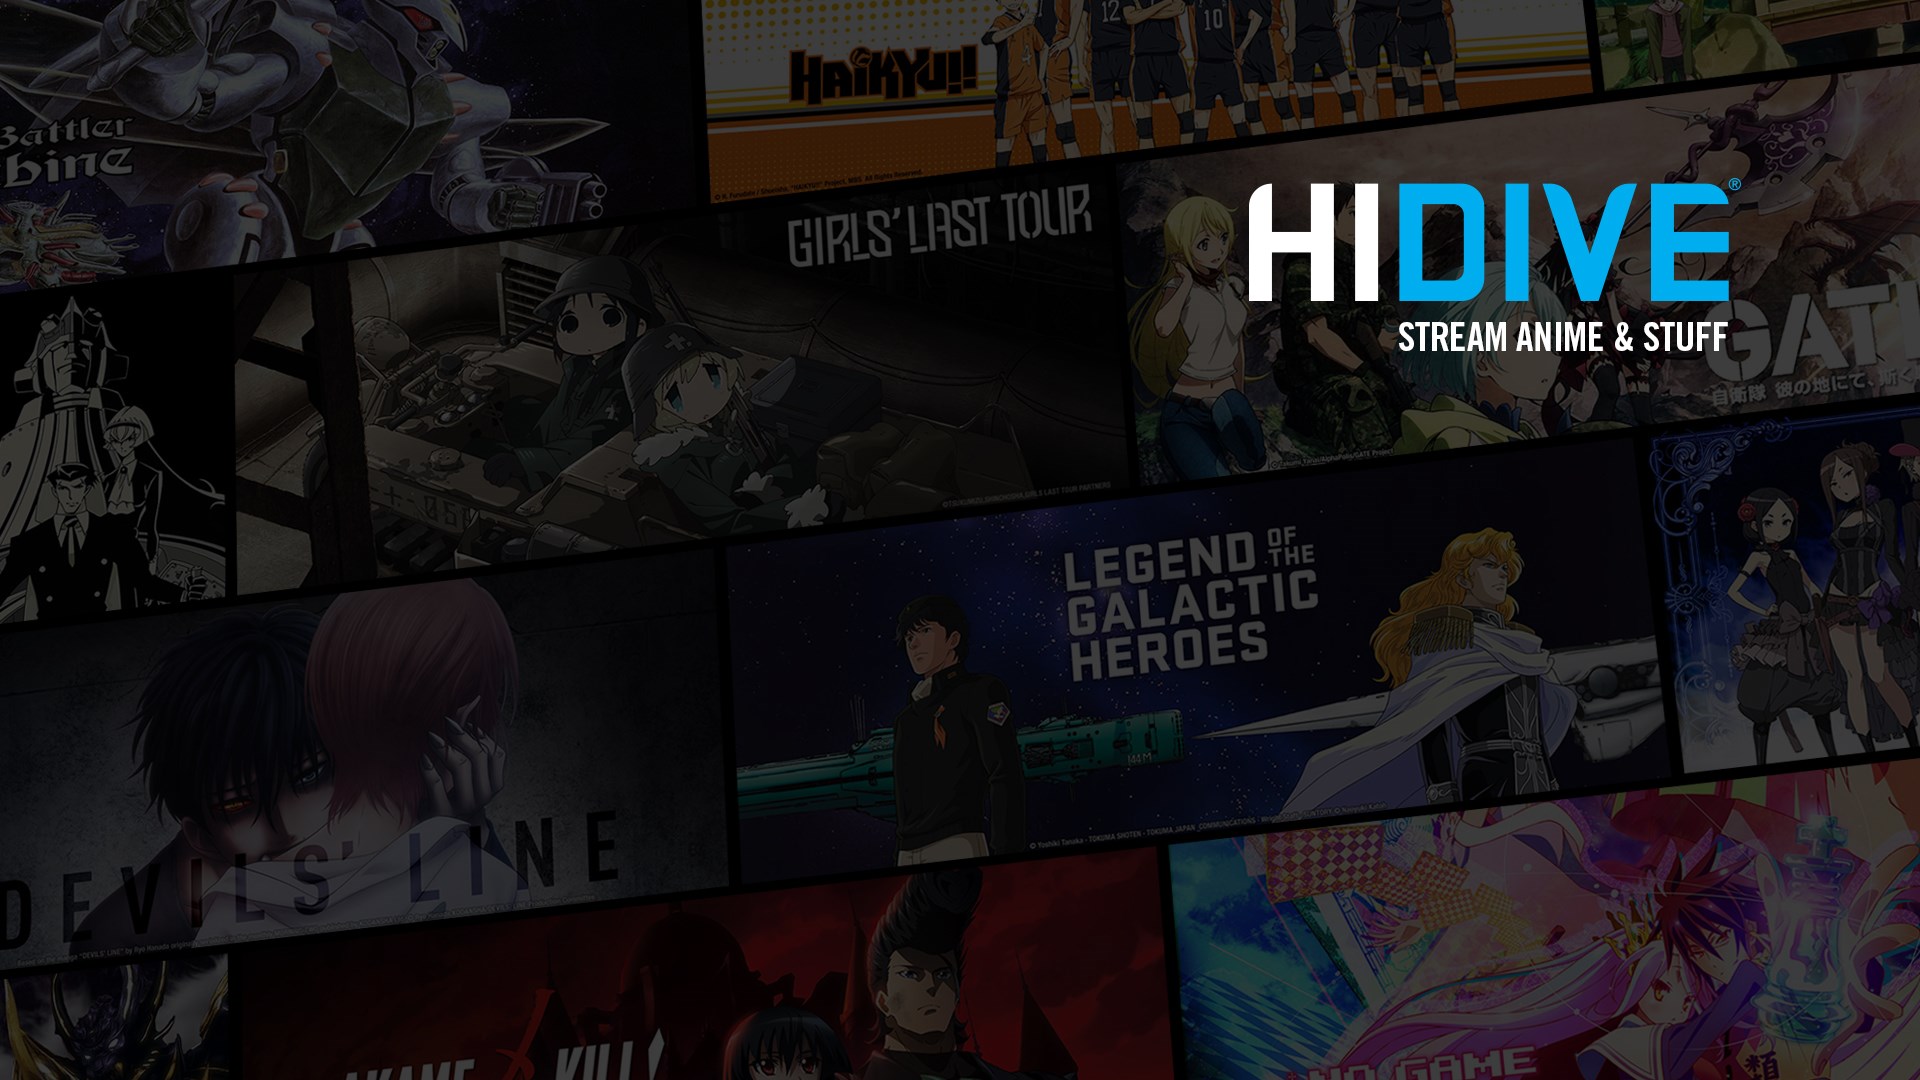 Sentai - Our pals at HIDIVE have 30-day free trials to their anime  streaming service! If you love anime, you don't want to miss out on this  deal! 💚 More info here: